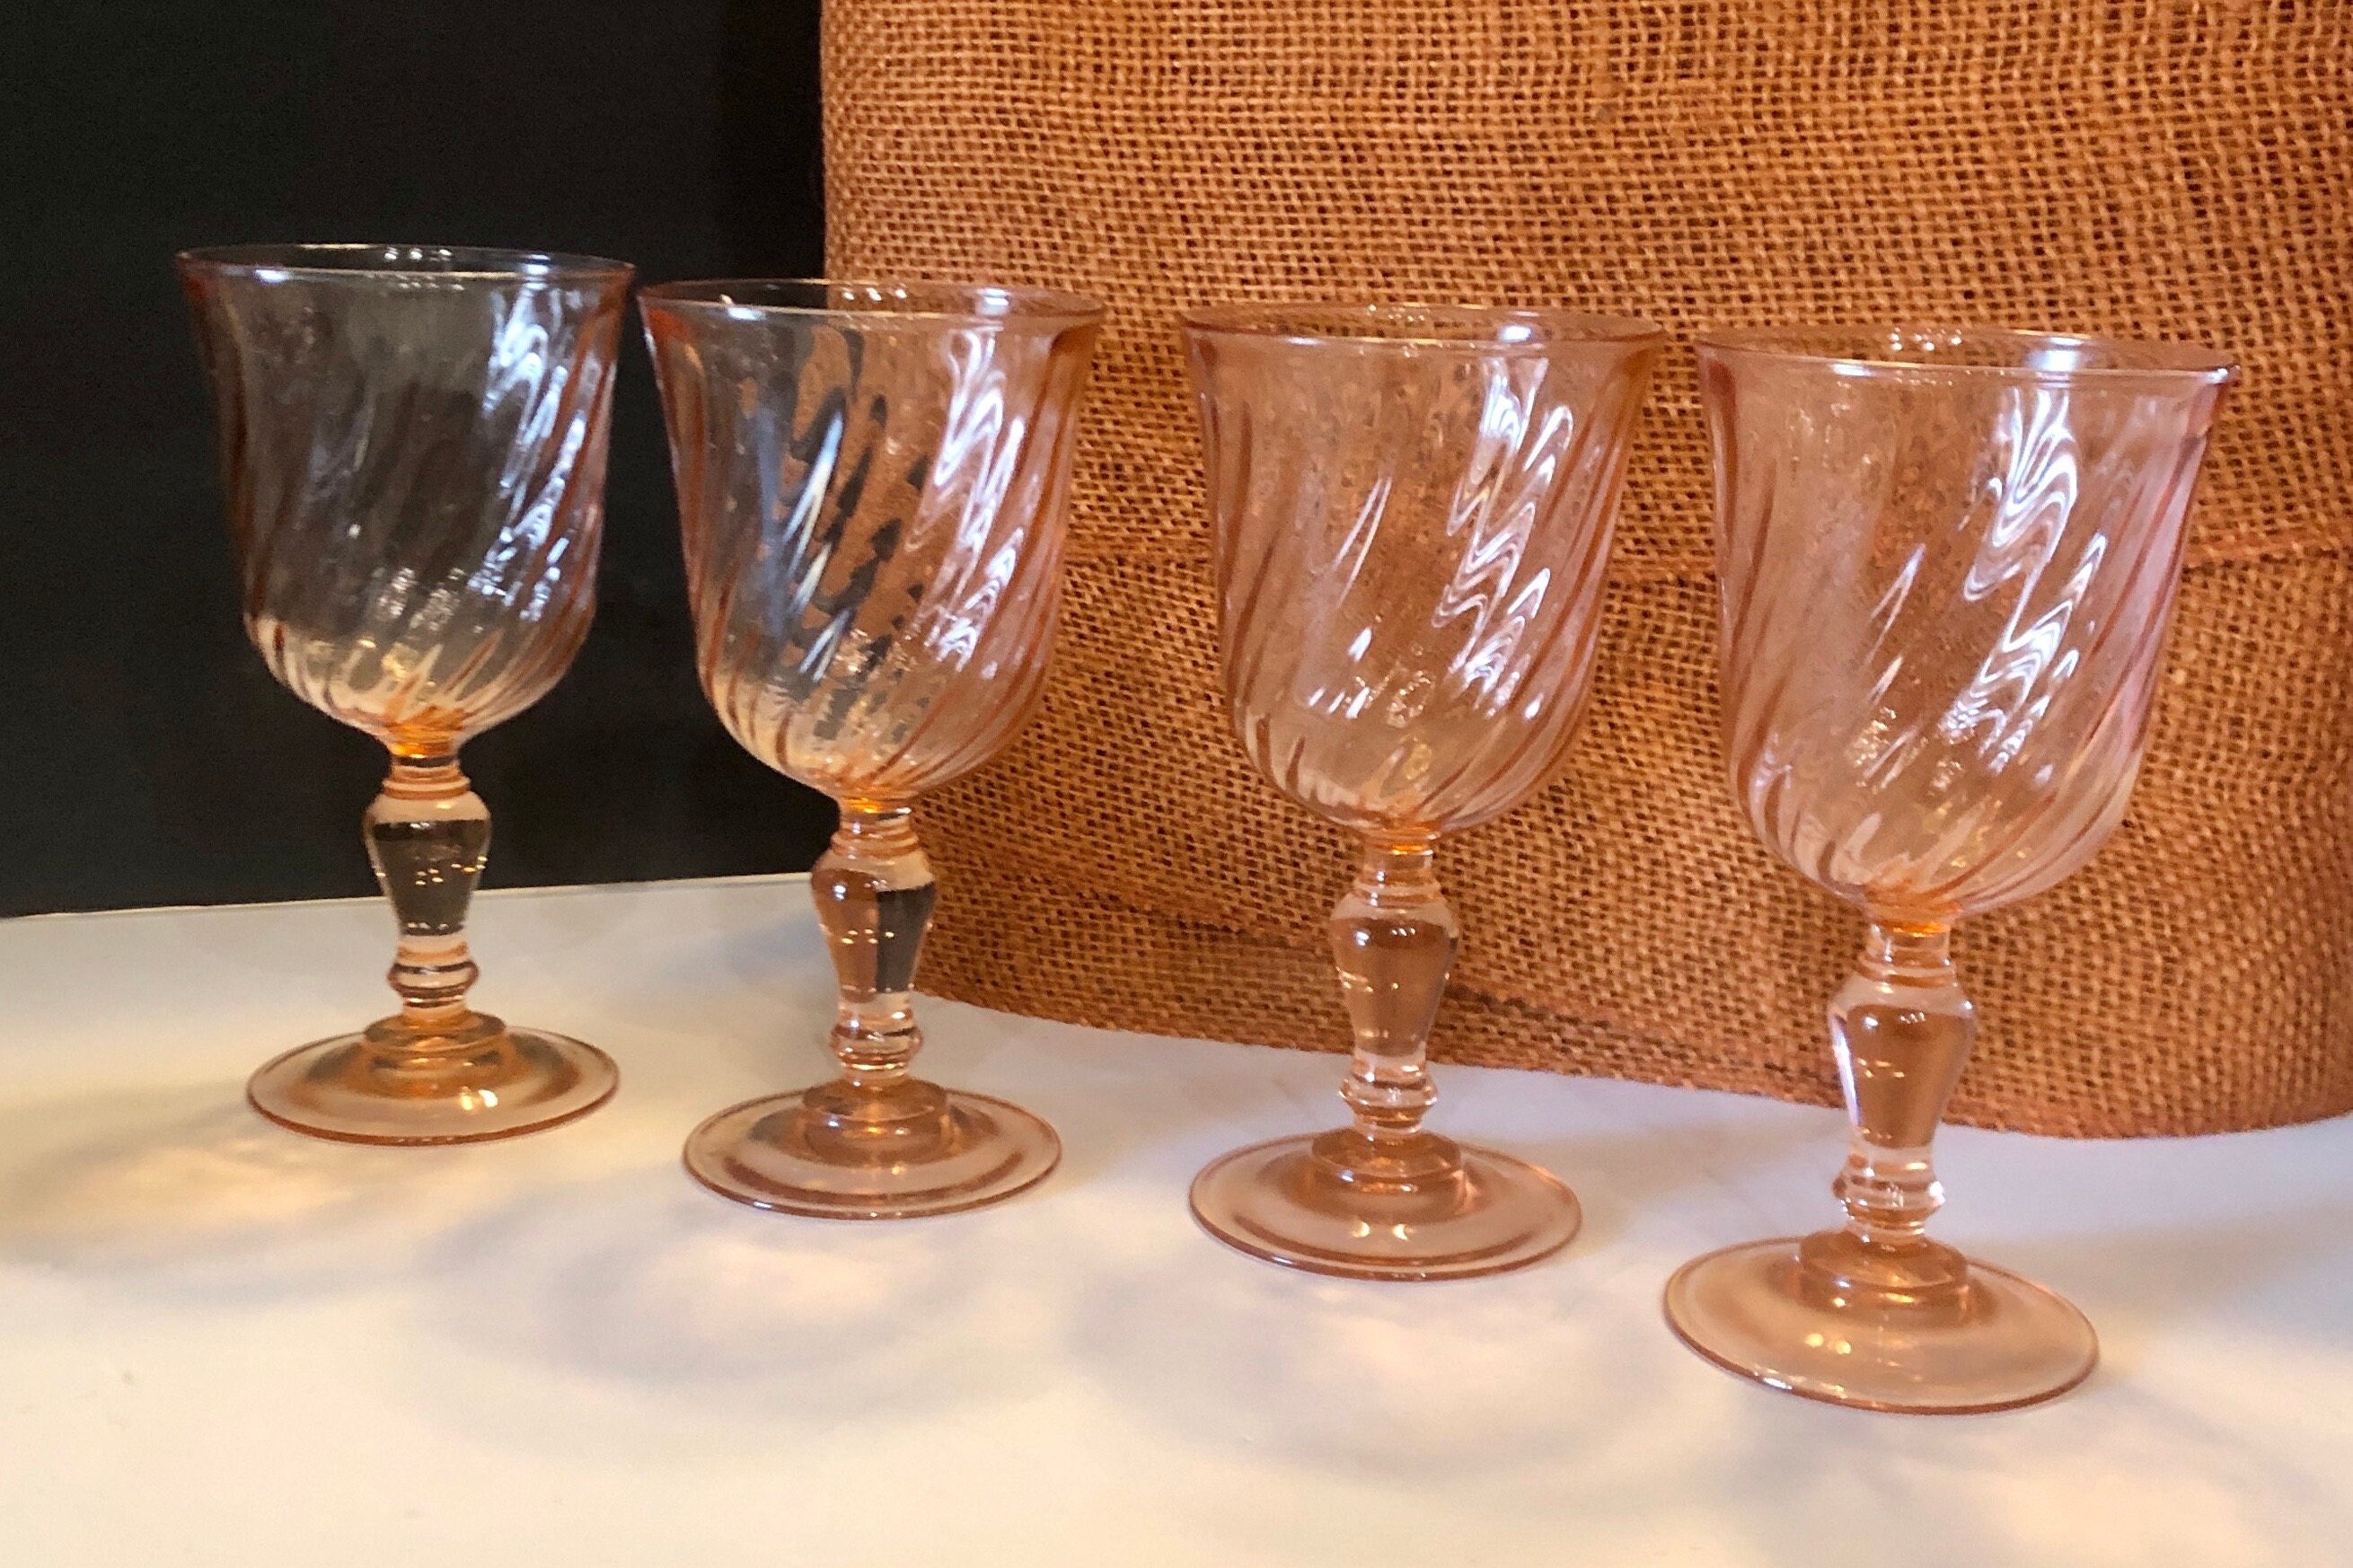 Pink Libbey Goblets - The Curious Cowgirl - Vintage Shop